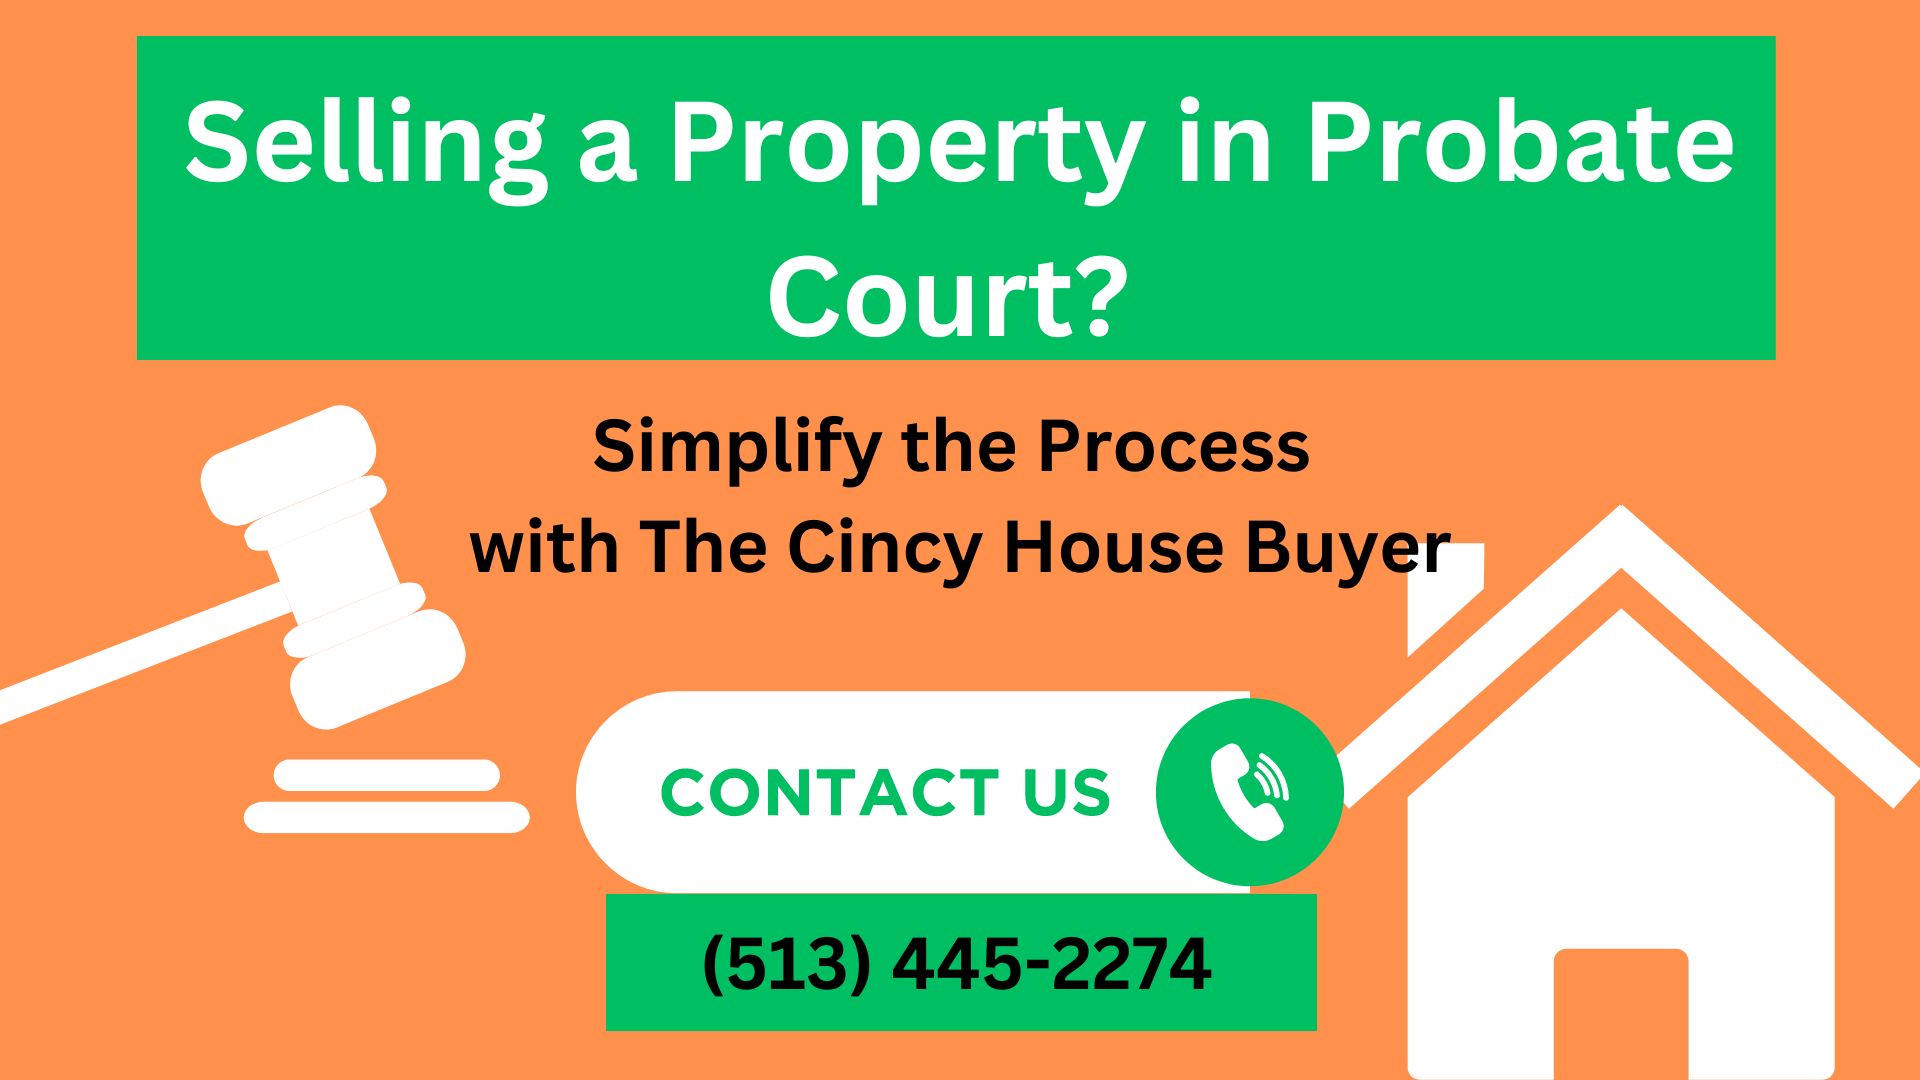 Selling a Property in Probate Court? Simplify the Process with The Cincy House Buyer